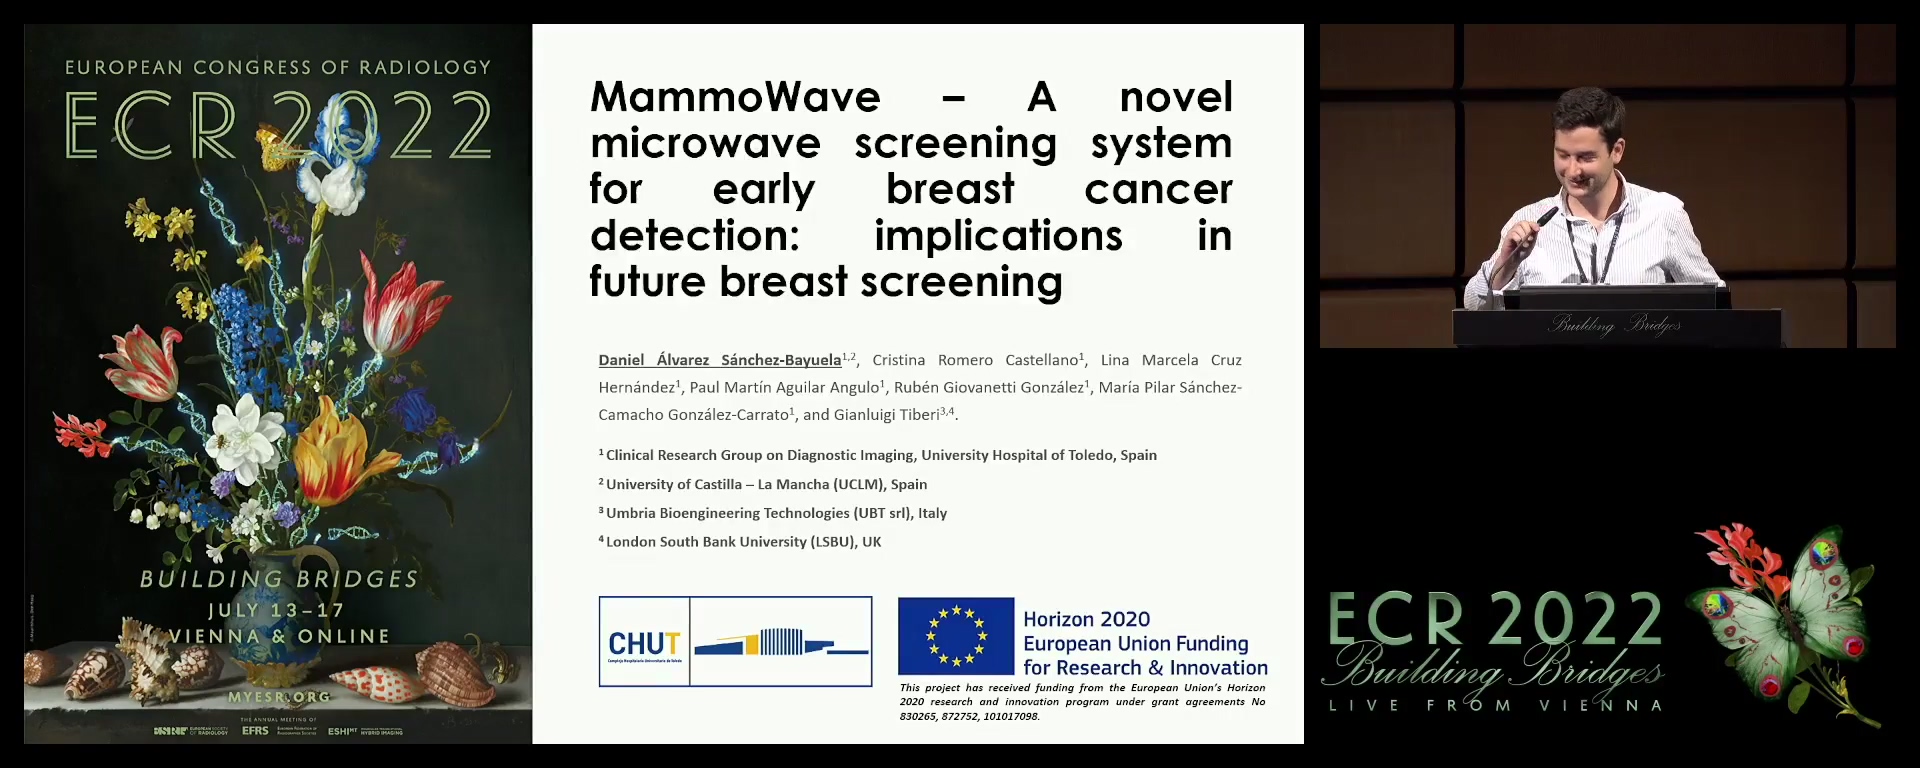 MammoWave - a novel microwave screening system for early breast cancer detection: implications in future breast screening